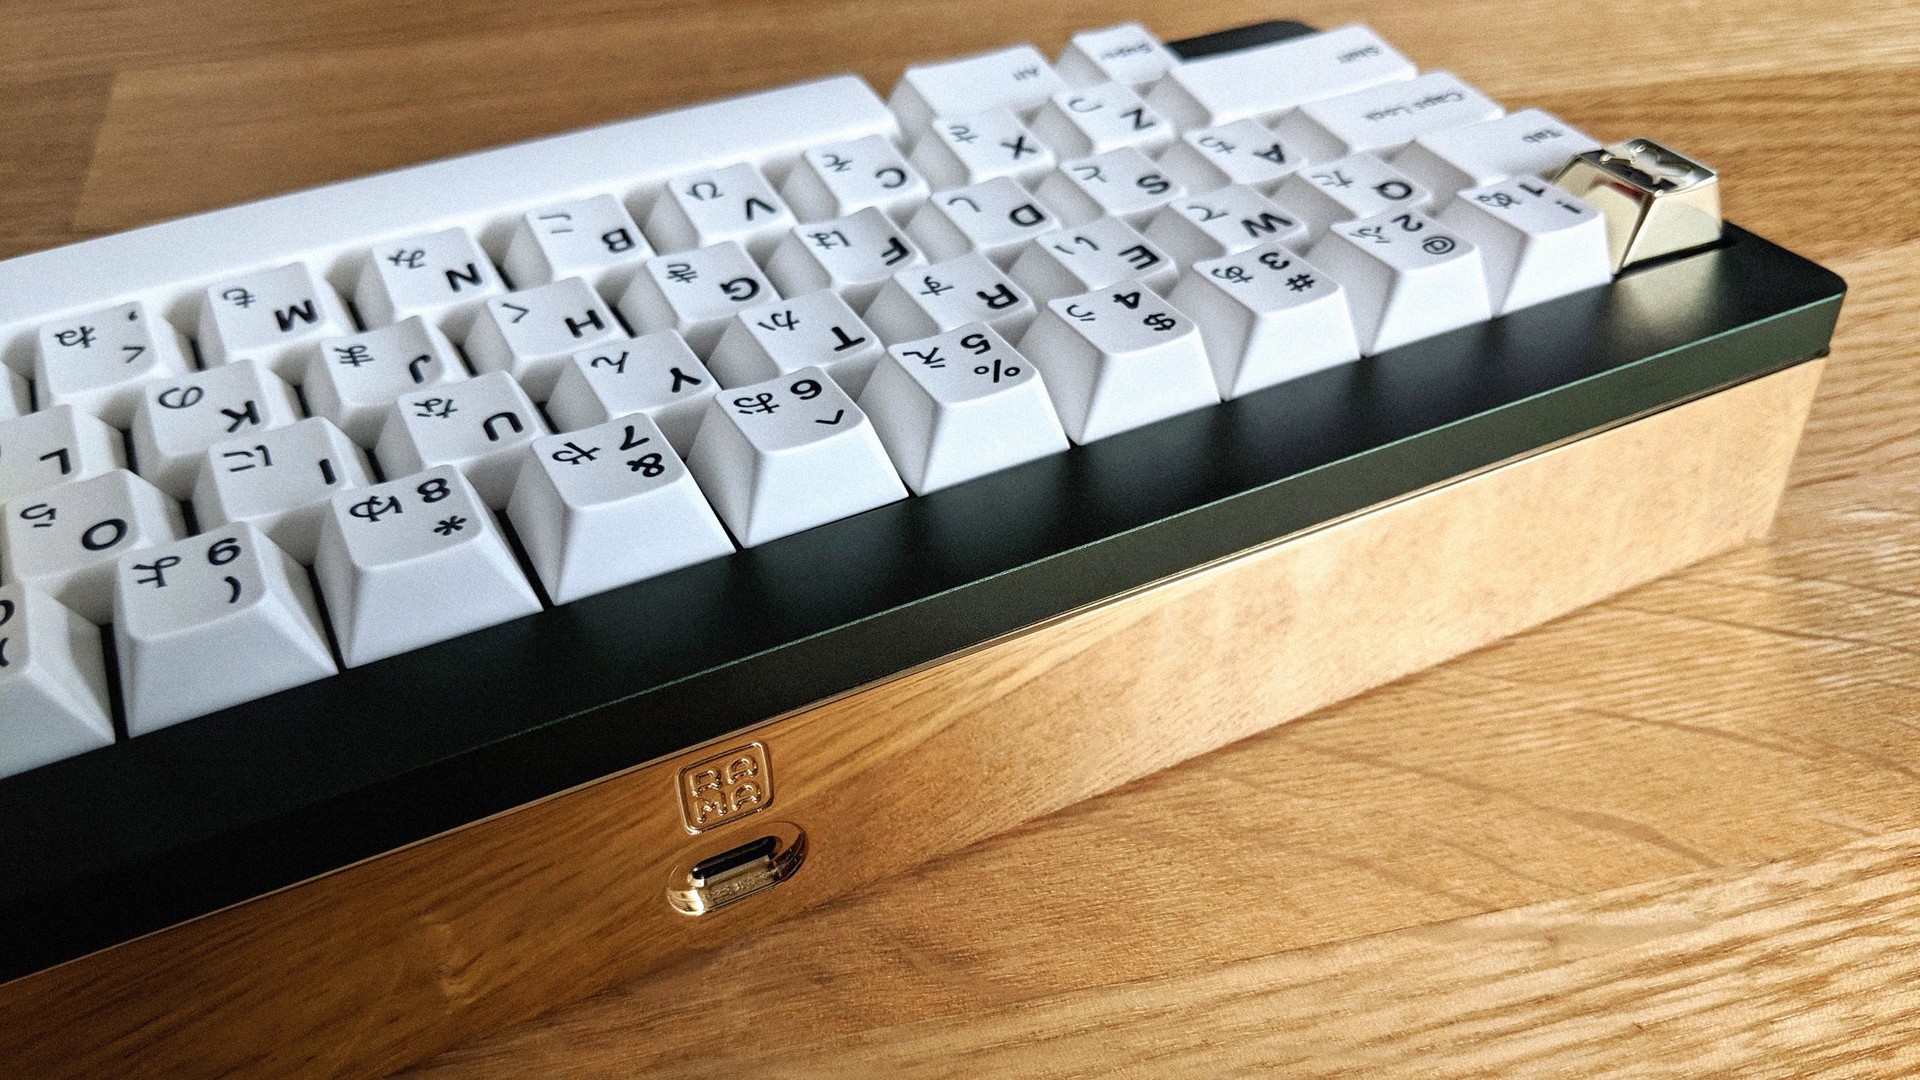 RAMA M-60a with PVD brass gold back weight on wooden desk